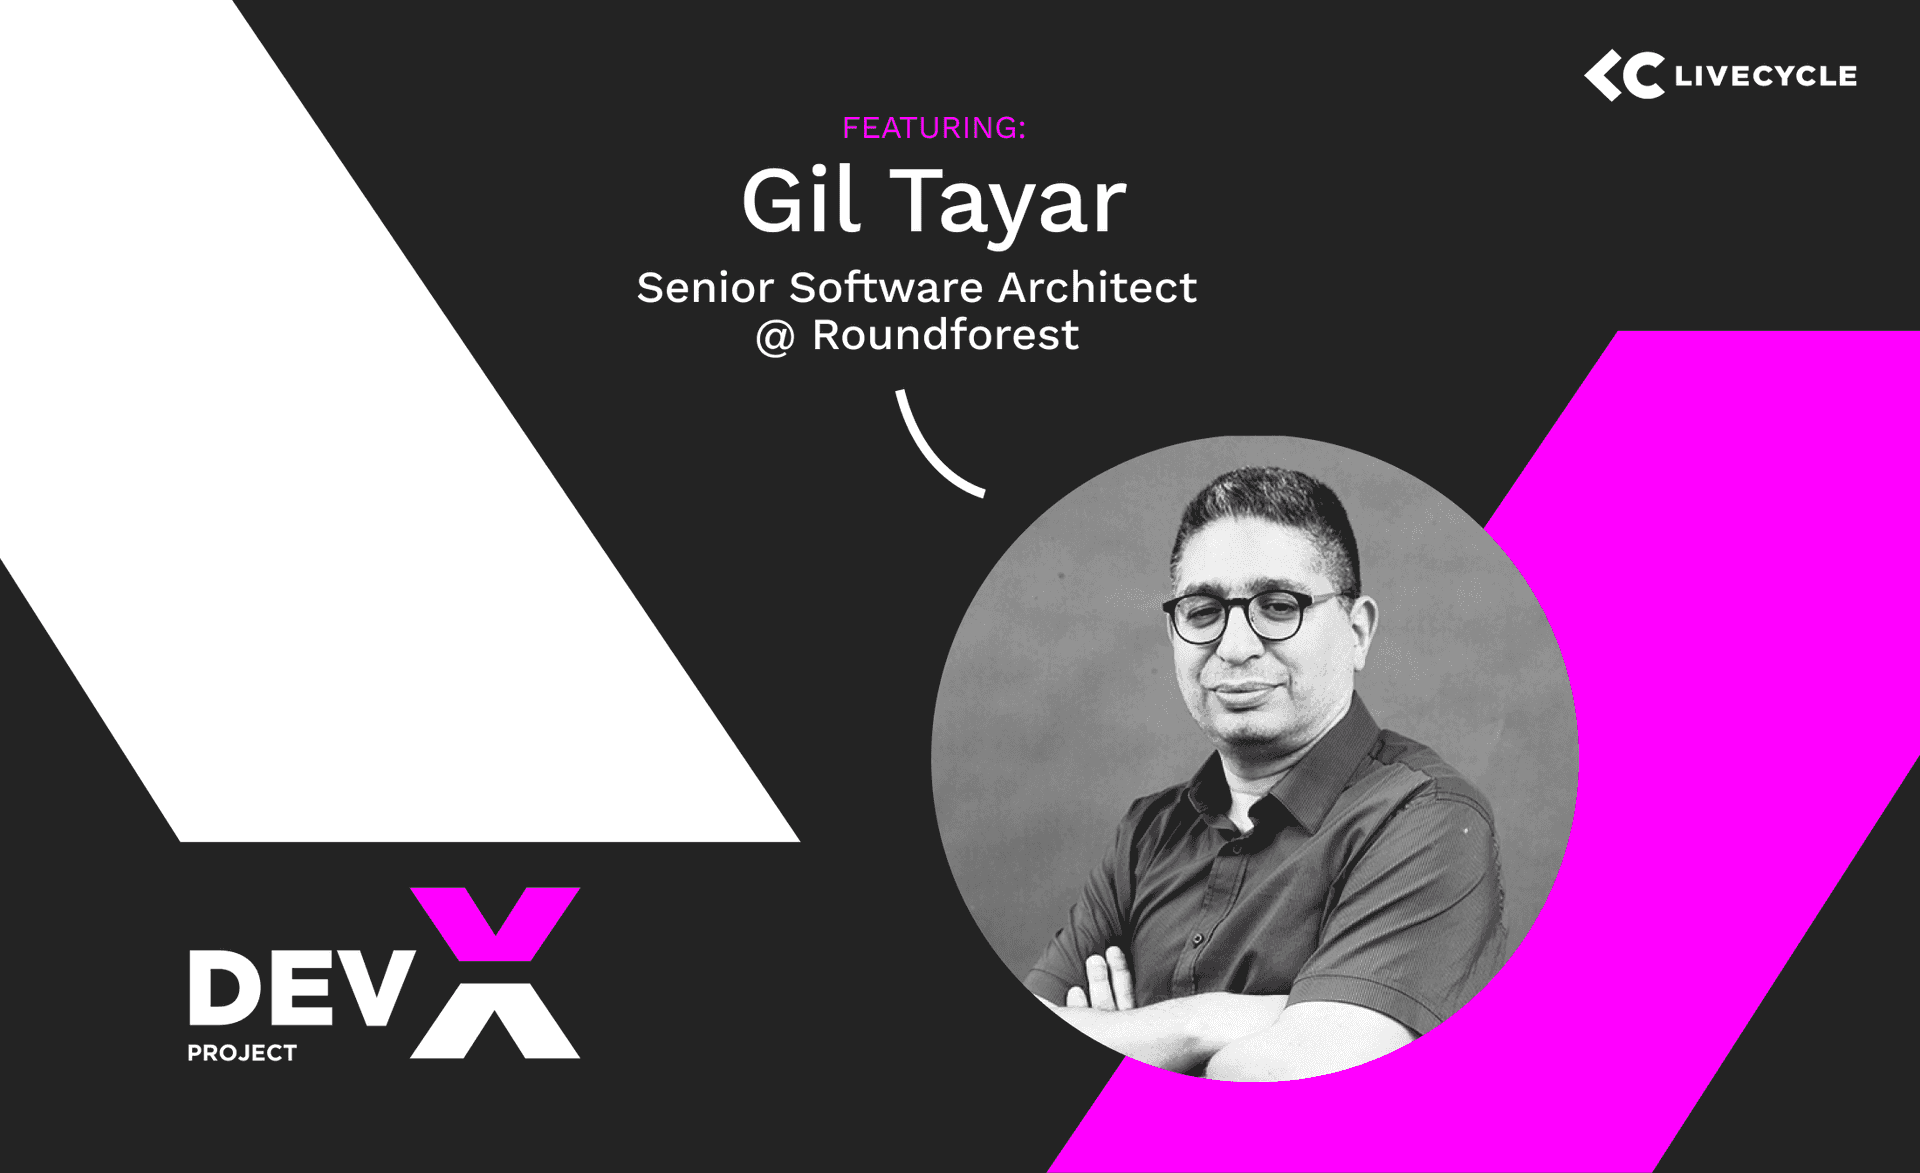 The Dev-X Project: Featuring Gil Tayar